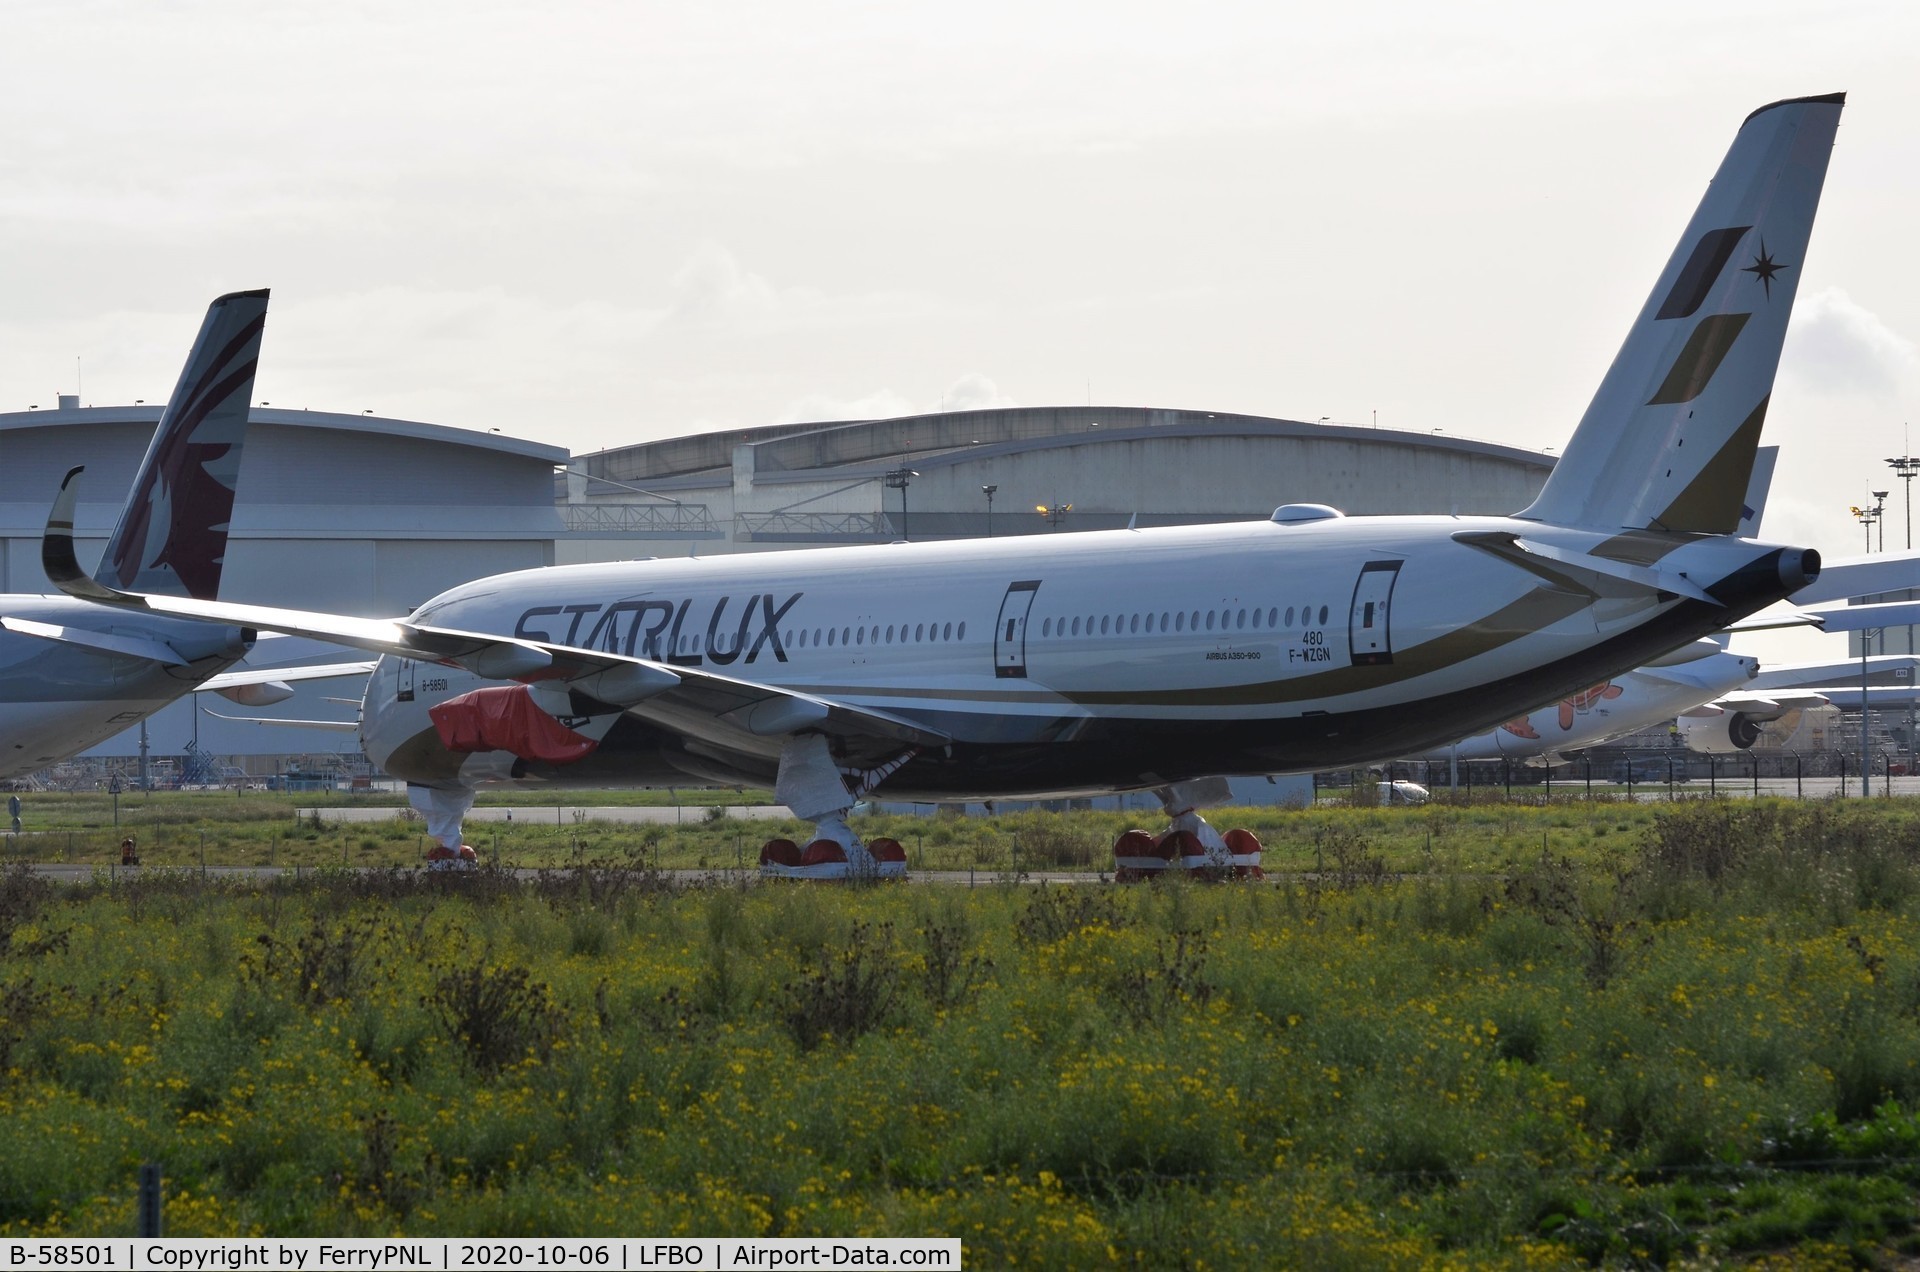 B-58501, 2021 Airbus A350-941 C/N 480, Starlux A359 awaiting completion